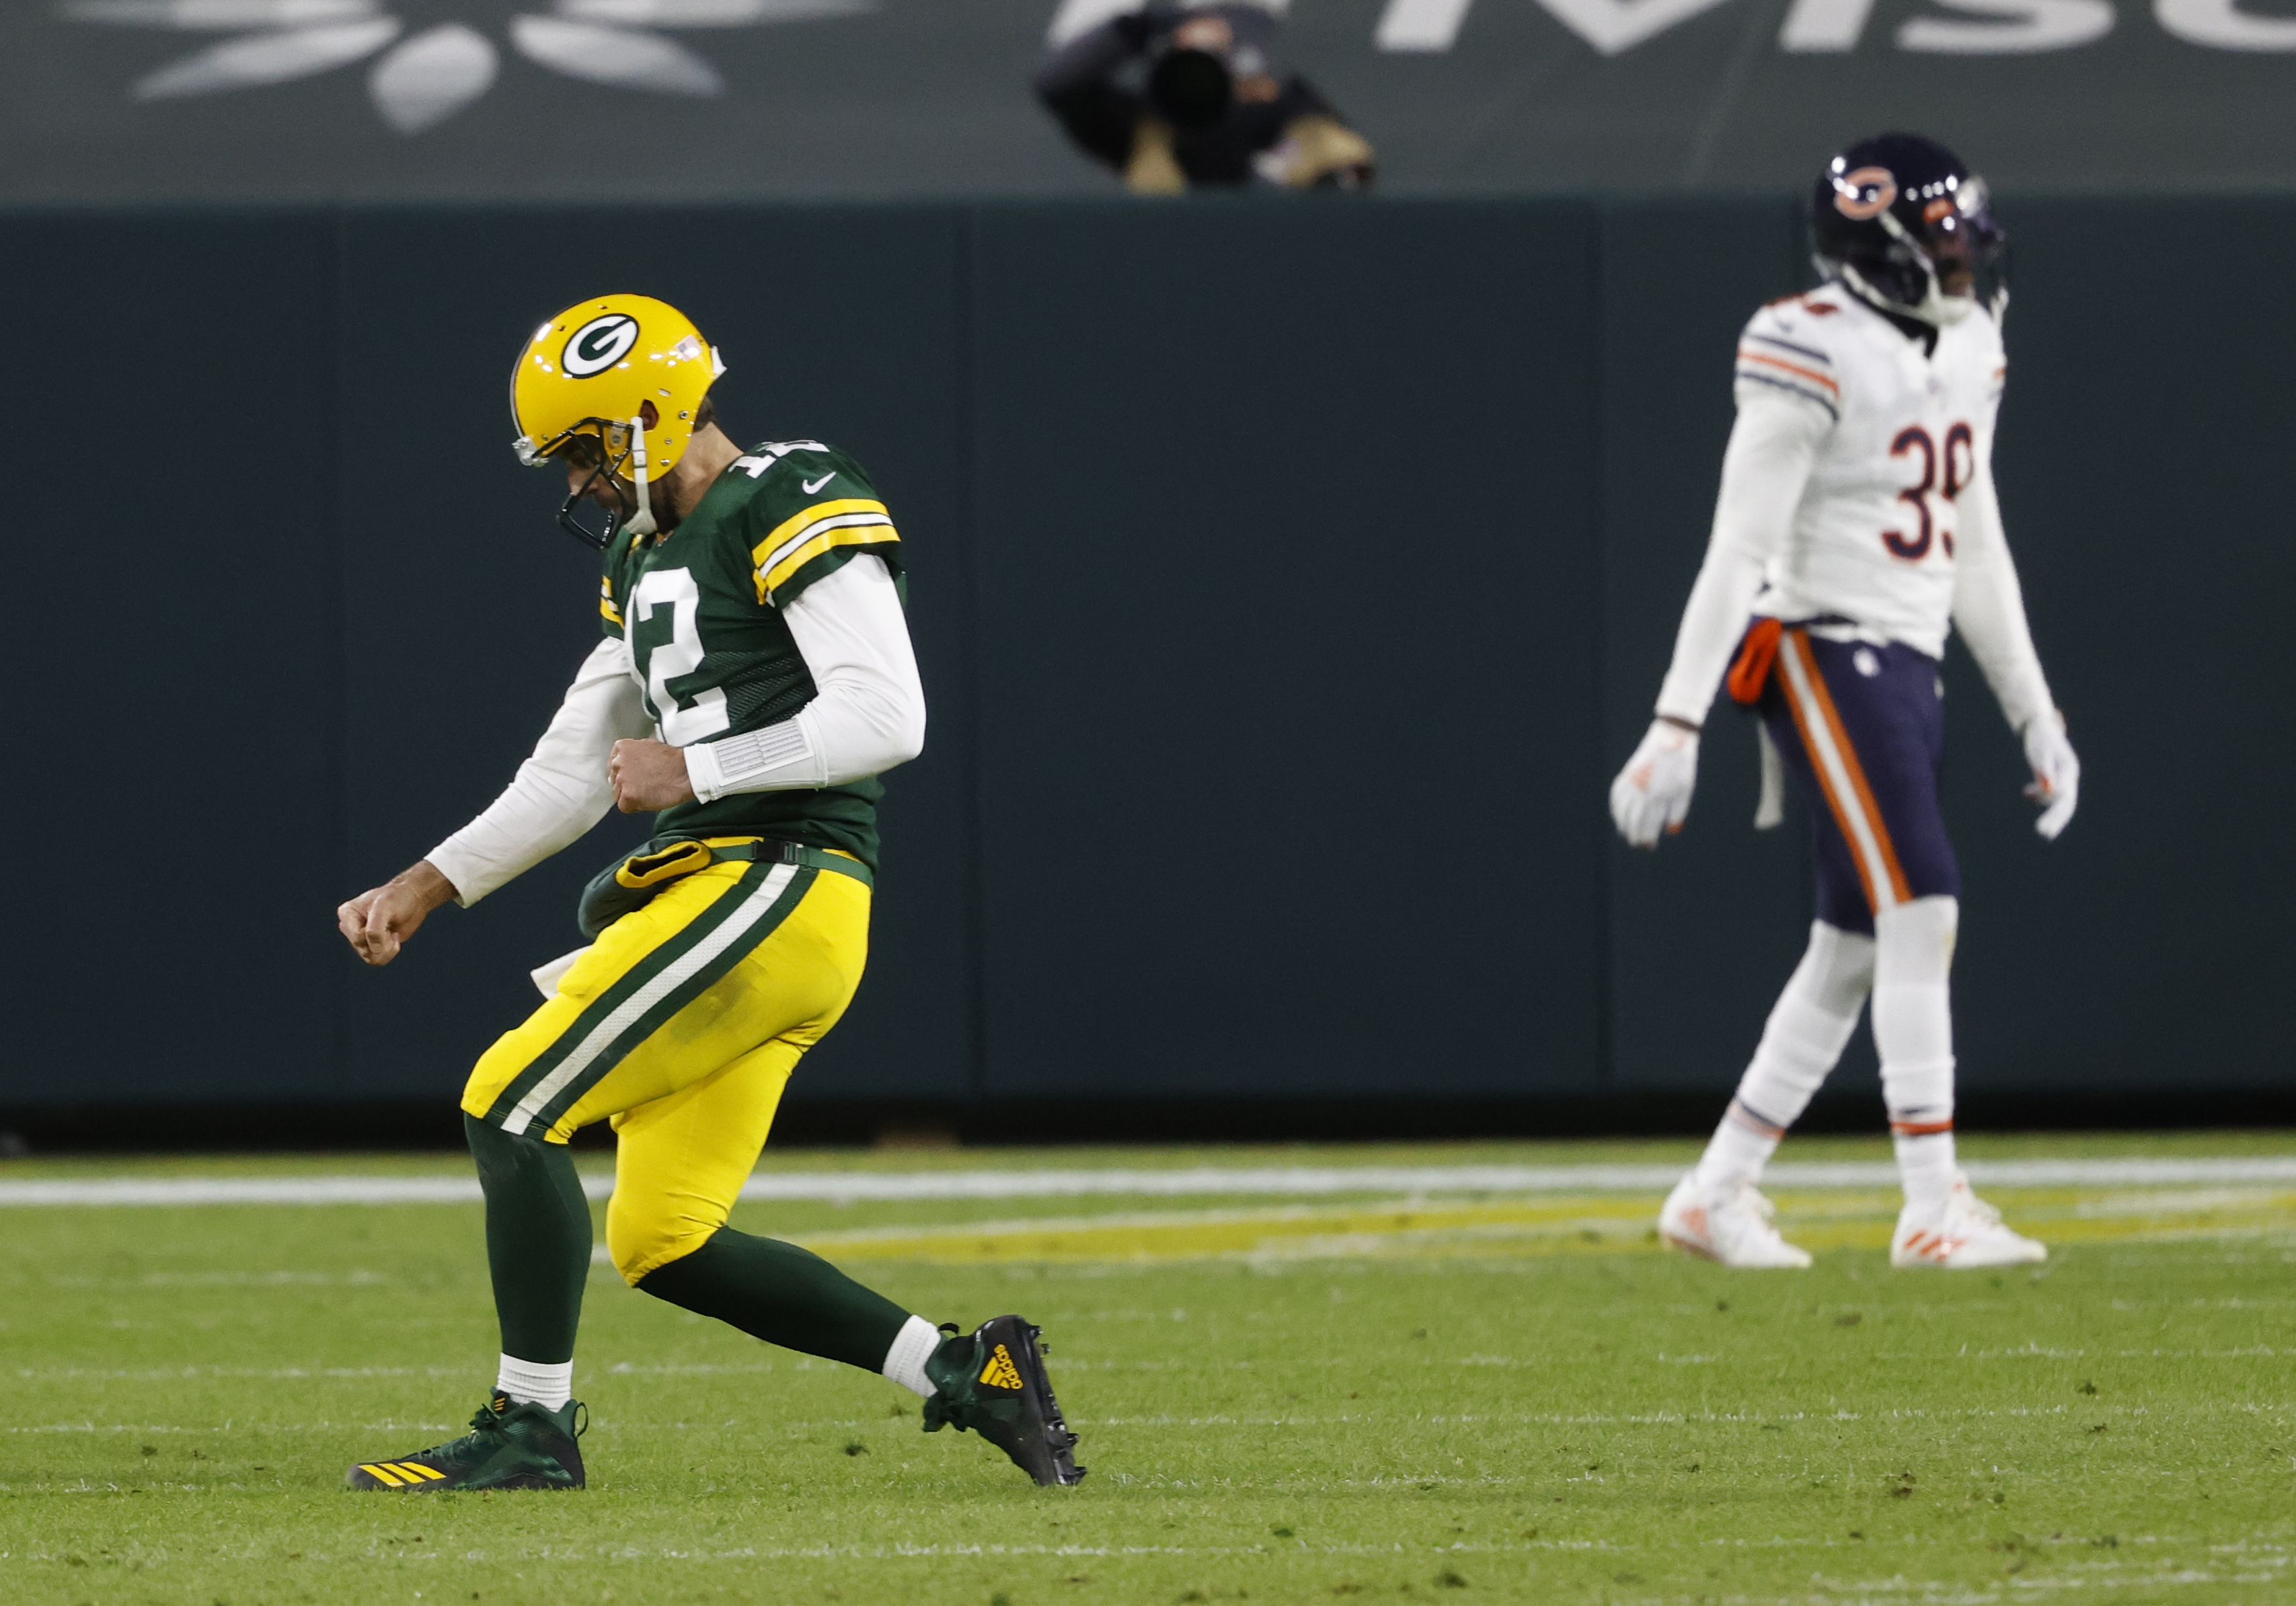 Rodgers' 4 TD passes help Packers roll over Bears 41-25